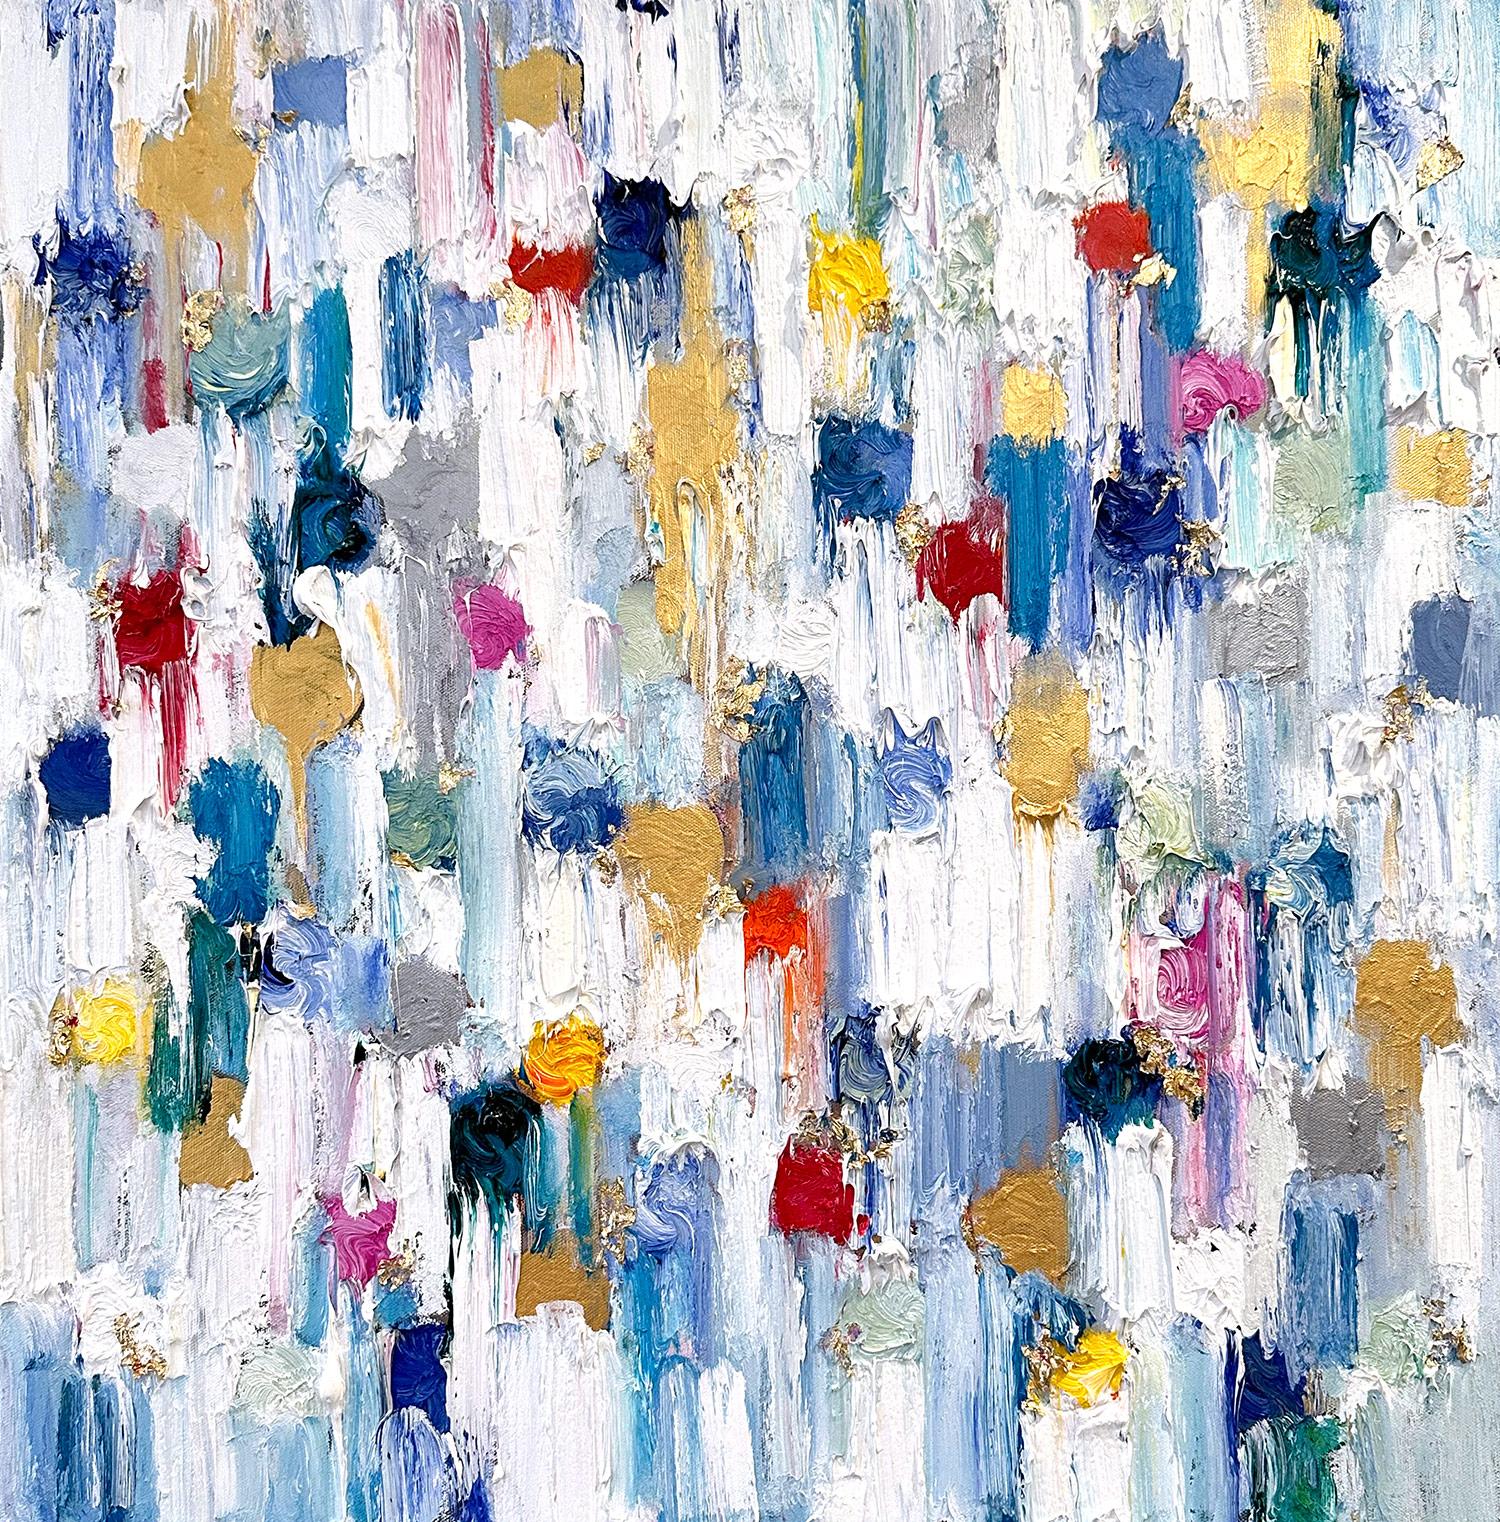 Cindy Shaoul Abstract Painting - "Dripping Dots - Saint Barts" Multicolor Contemporary Oil Painting on Canvas